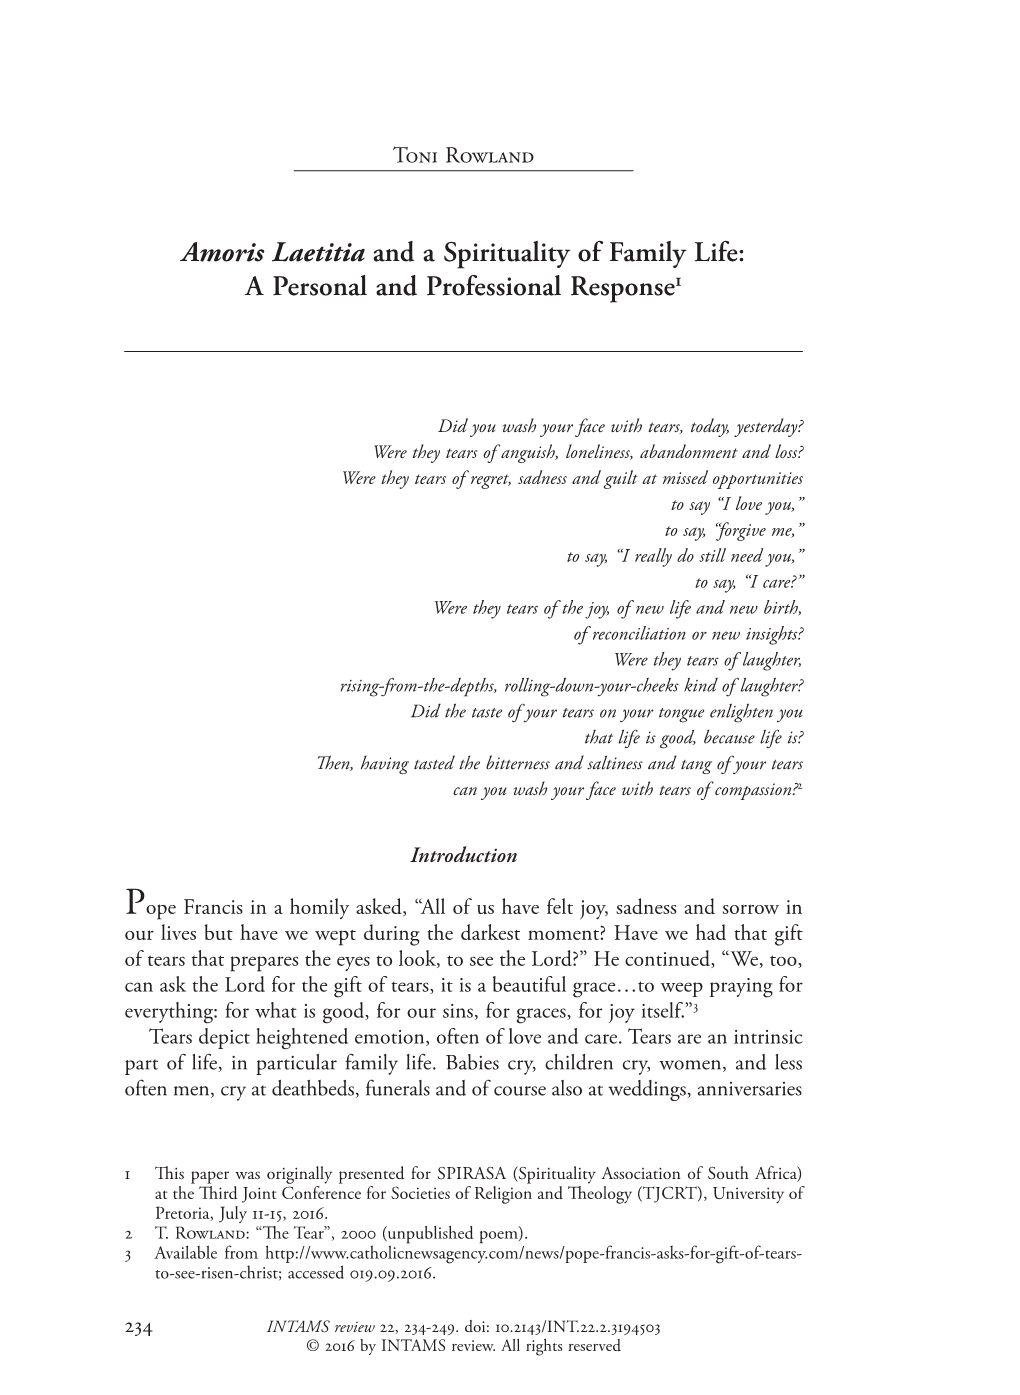 Amoris Laetitia and a Spirituality of Family Life: a Personal and Professional Response1